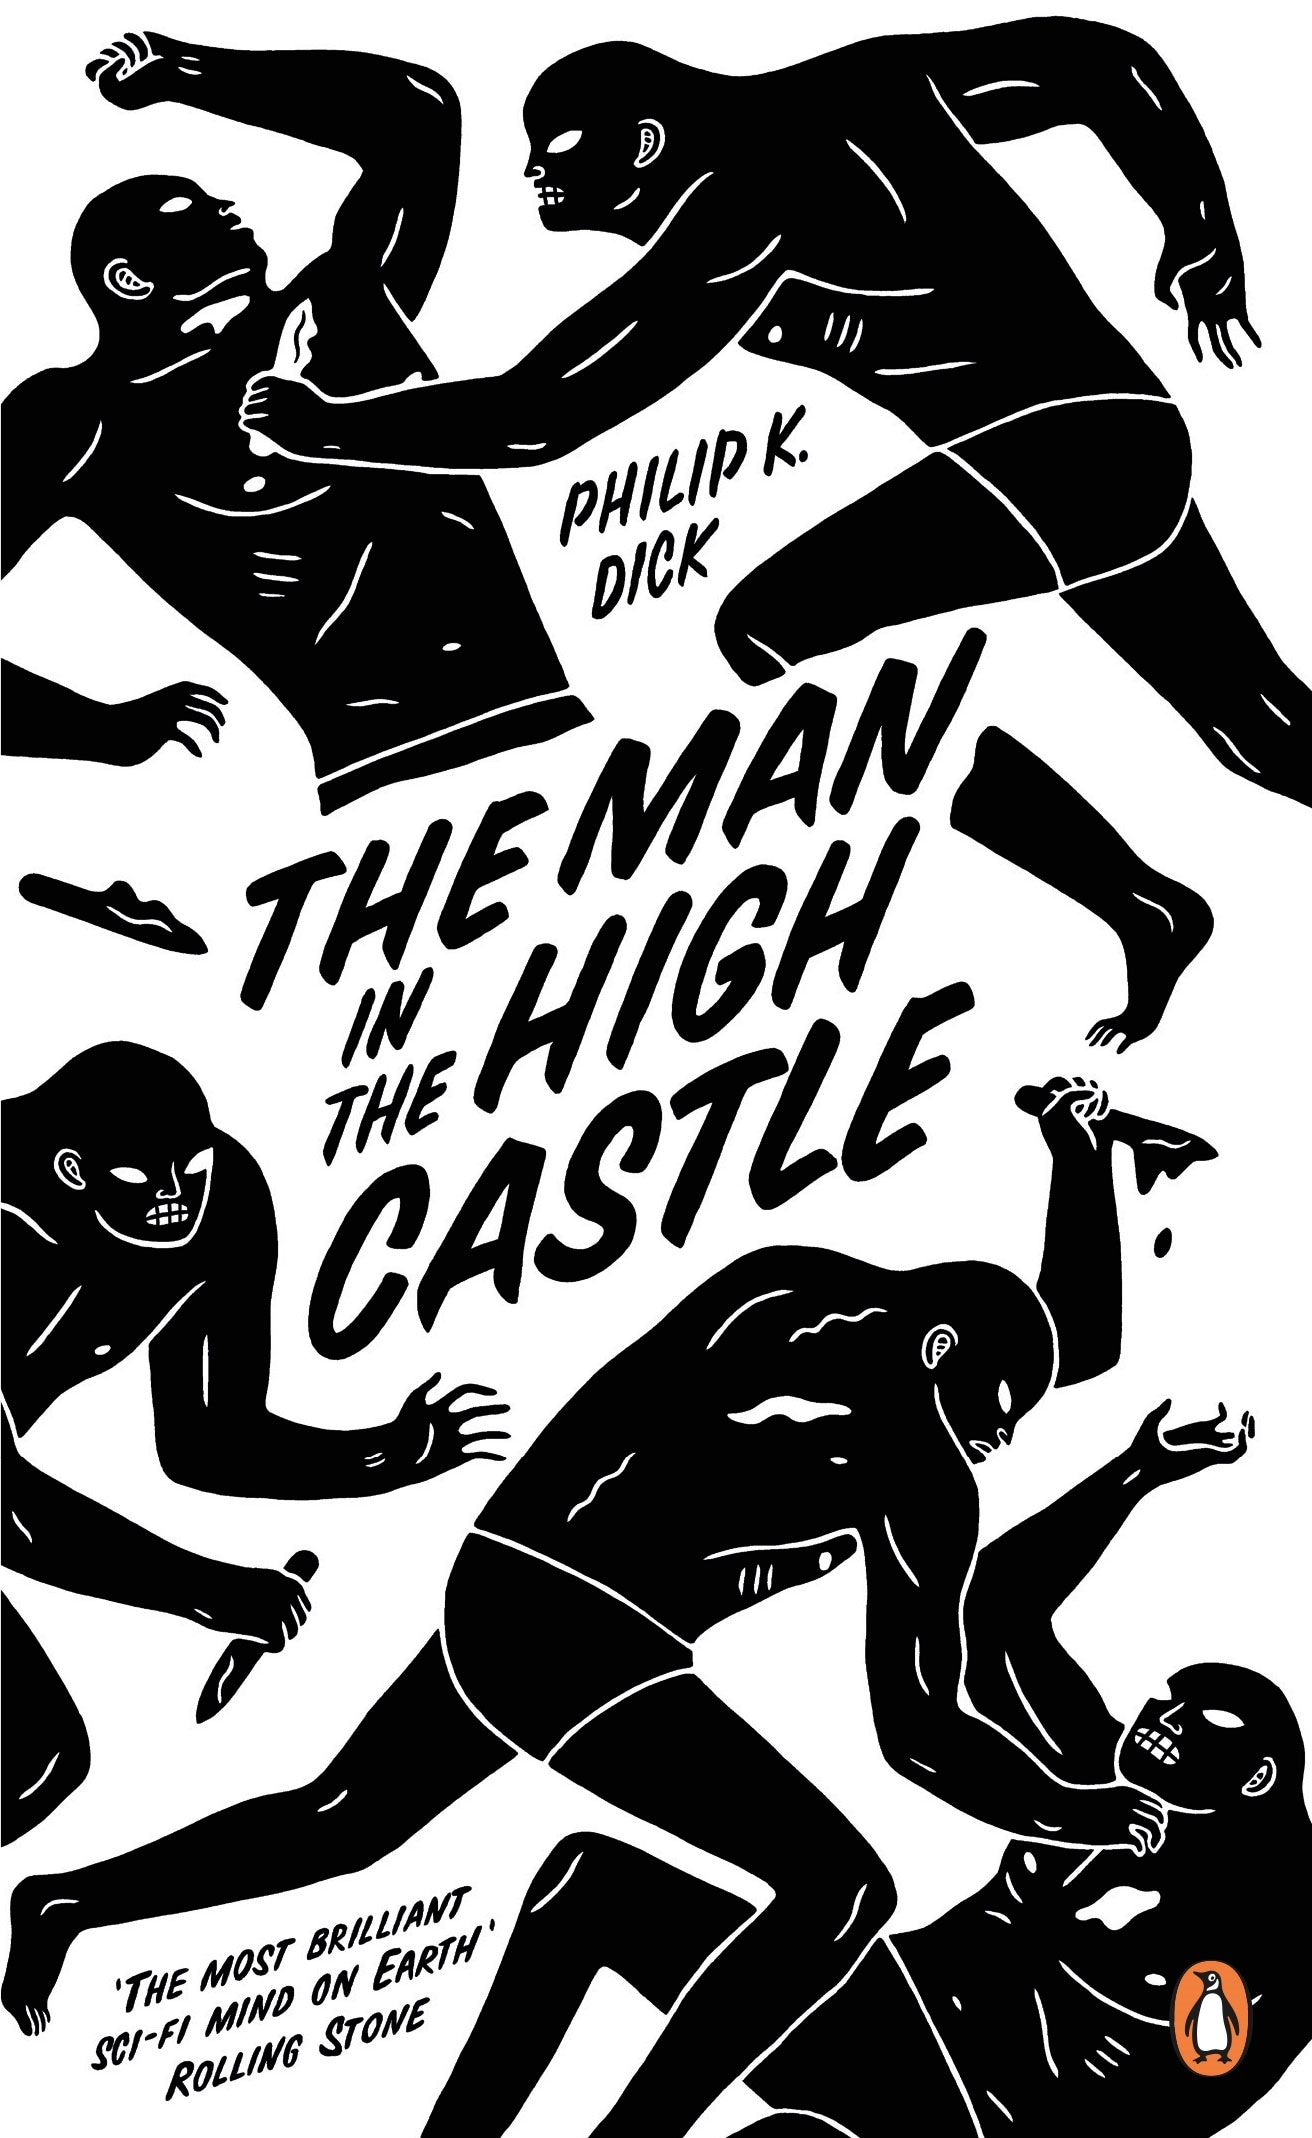 Book “The Man in the High Castle” by Philip K. Dick, Eric Brown — August 14, 2014